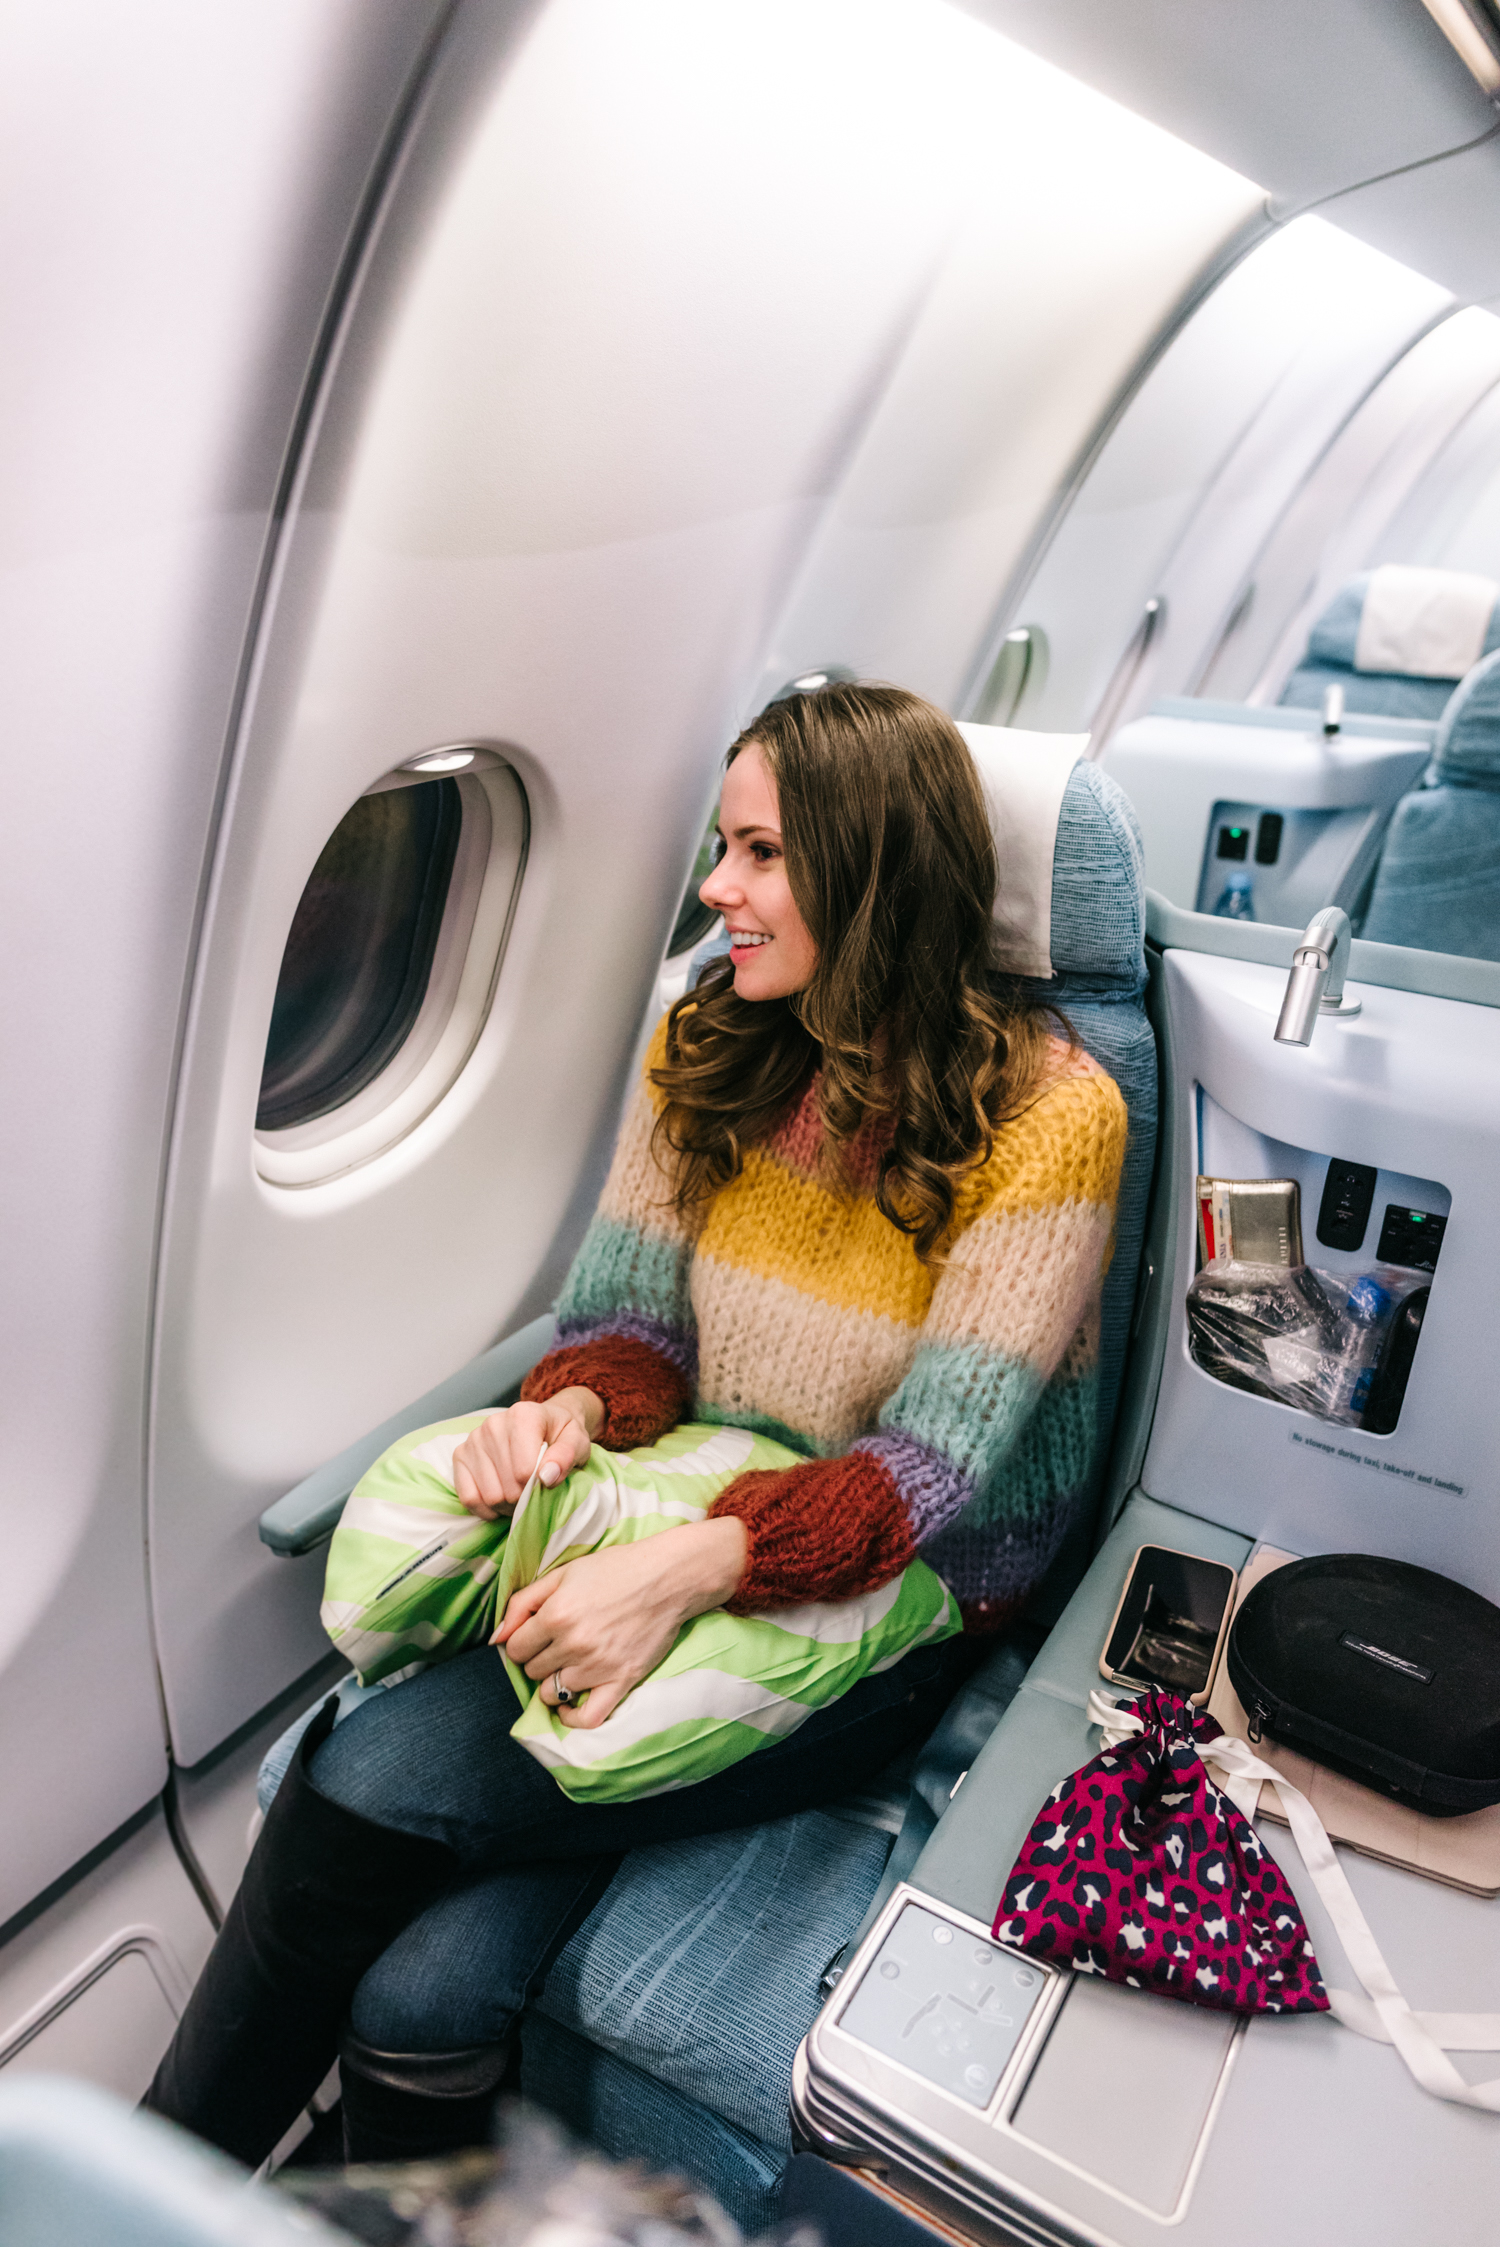 Alyssa Campanella of The A List blog flies to Finland with Finnair wearing Maiami striped sweater